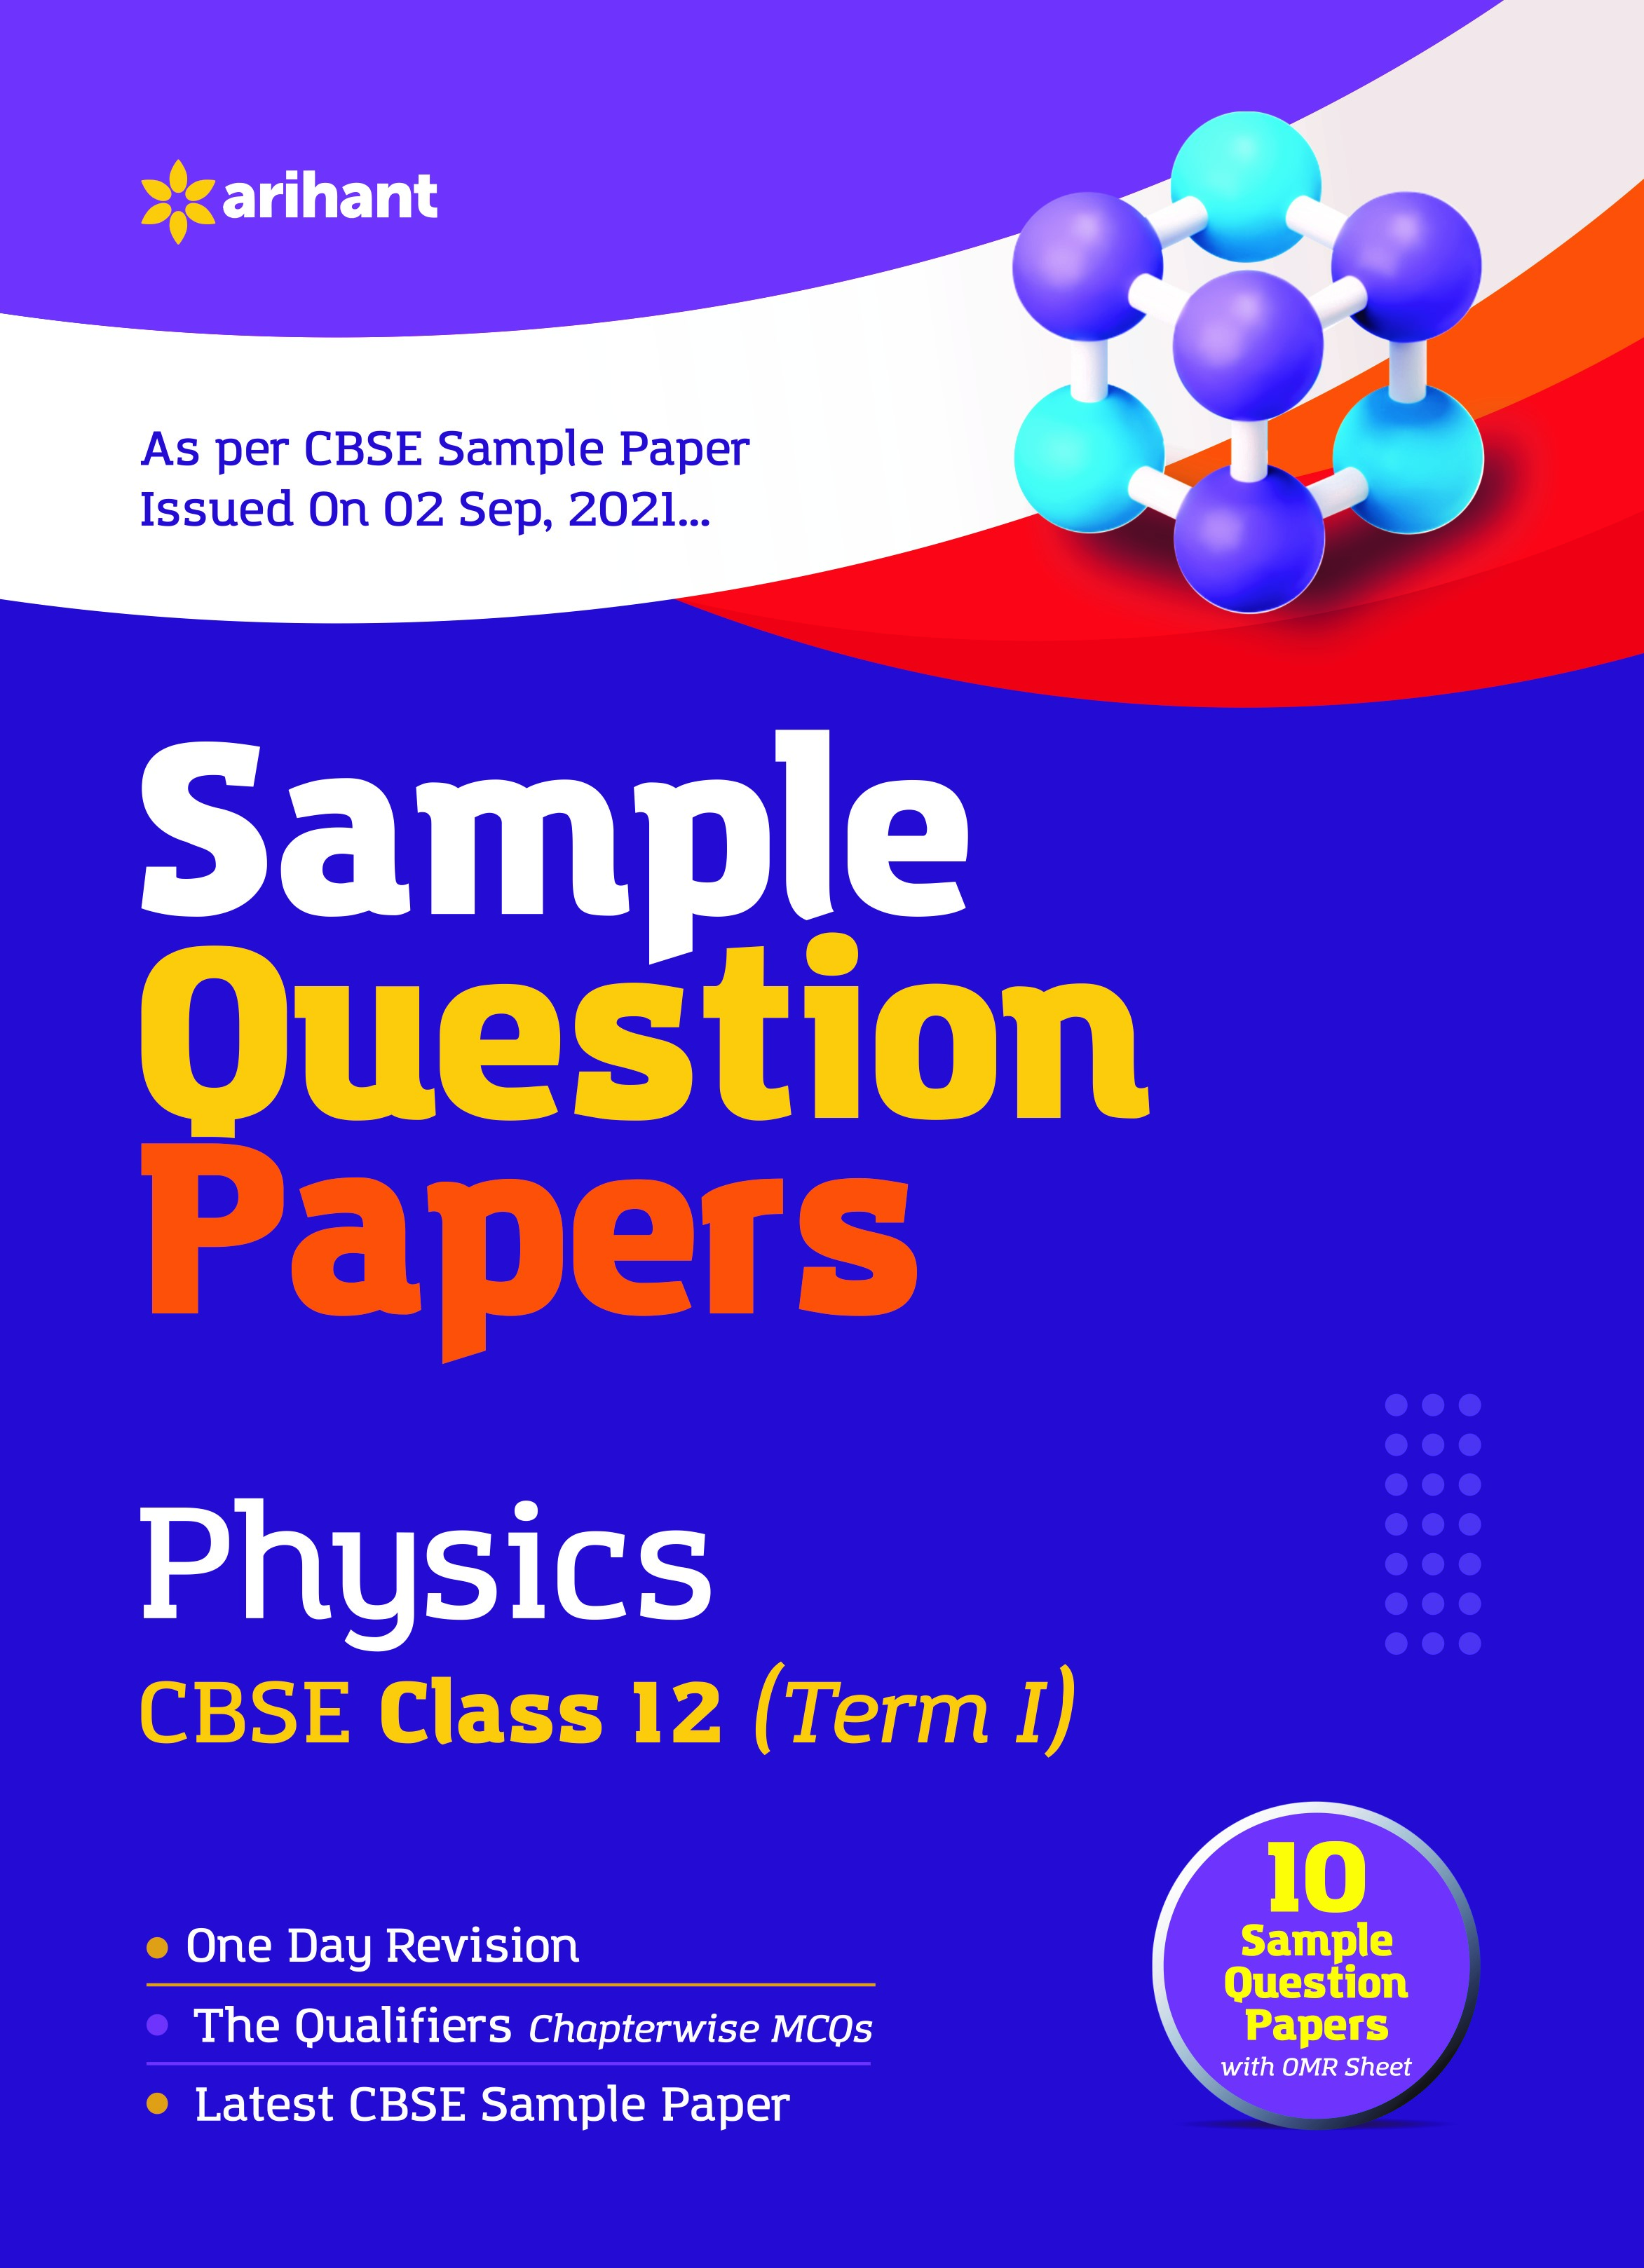 Arihant CBSE Term 1 Physics Sample Papers Questions for Class 12 MCQ Books for 2021 (As Per CBSE Sample Papers issued on 2 Sep 2021)